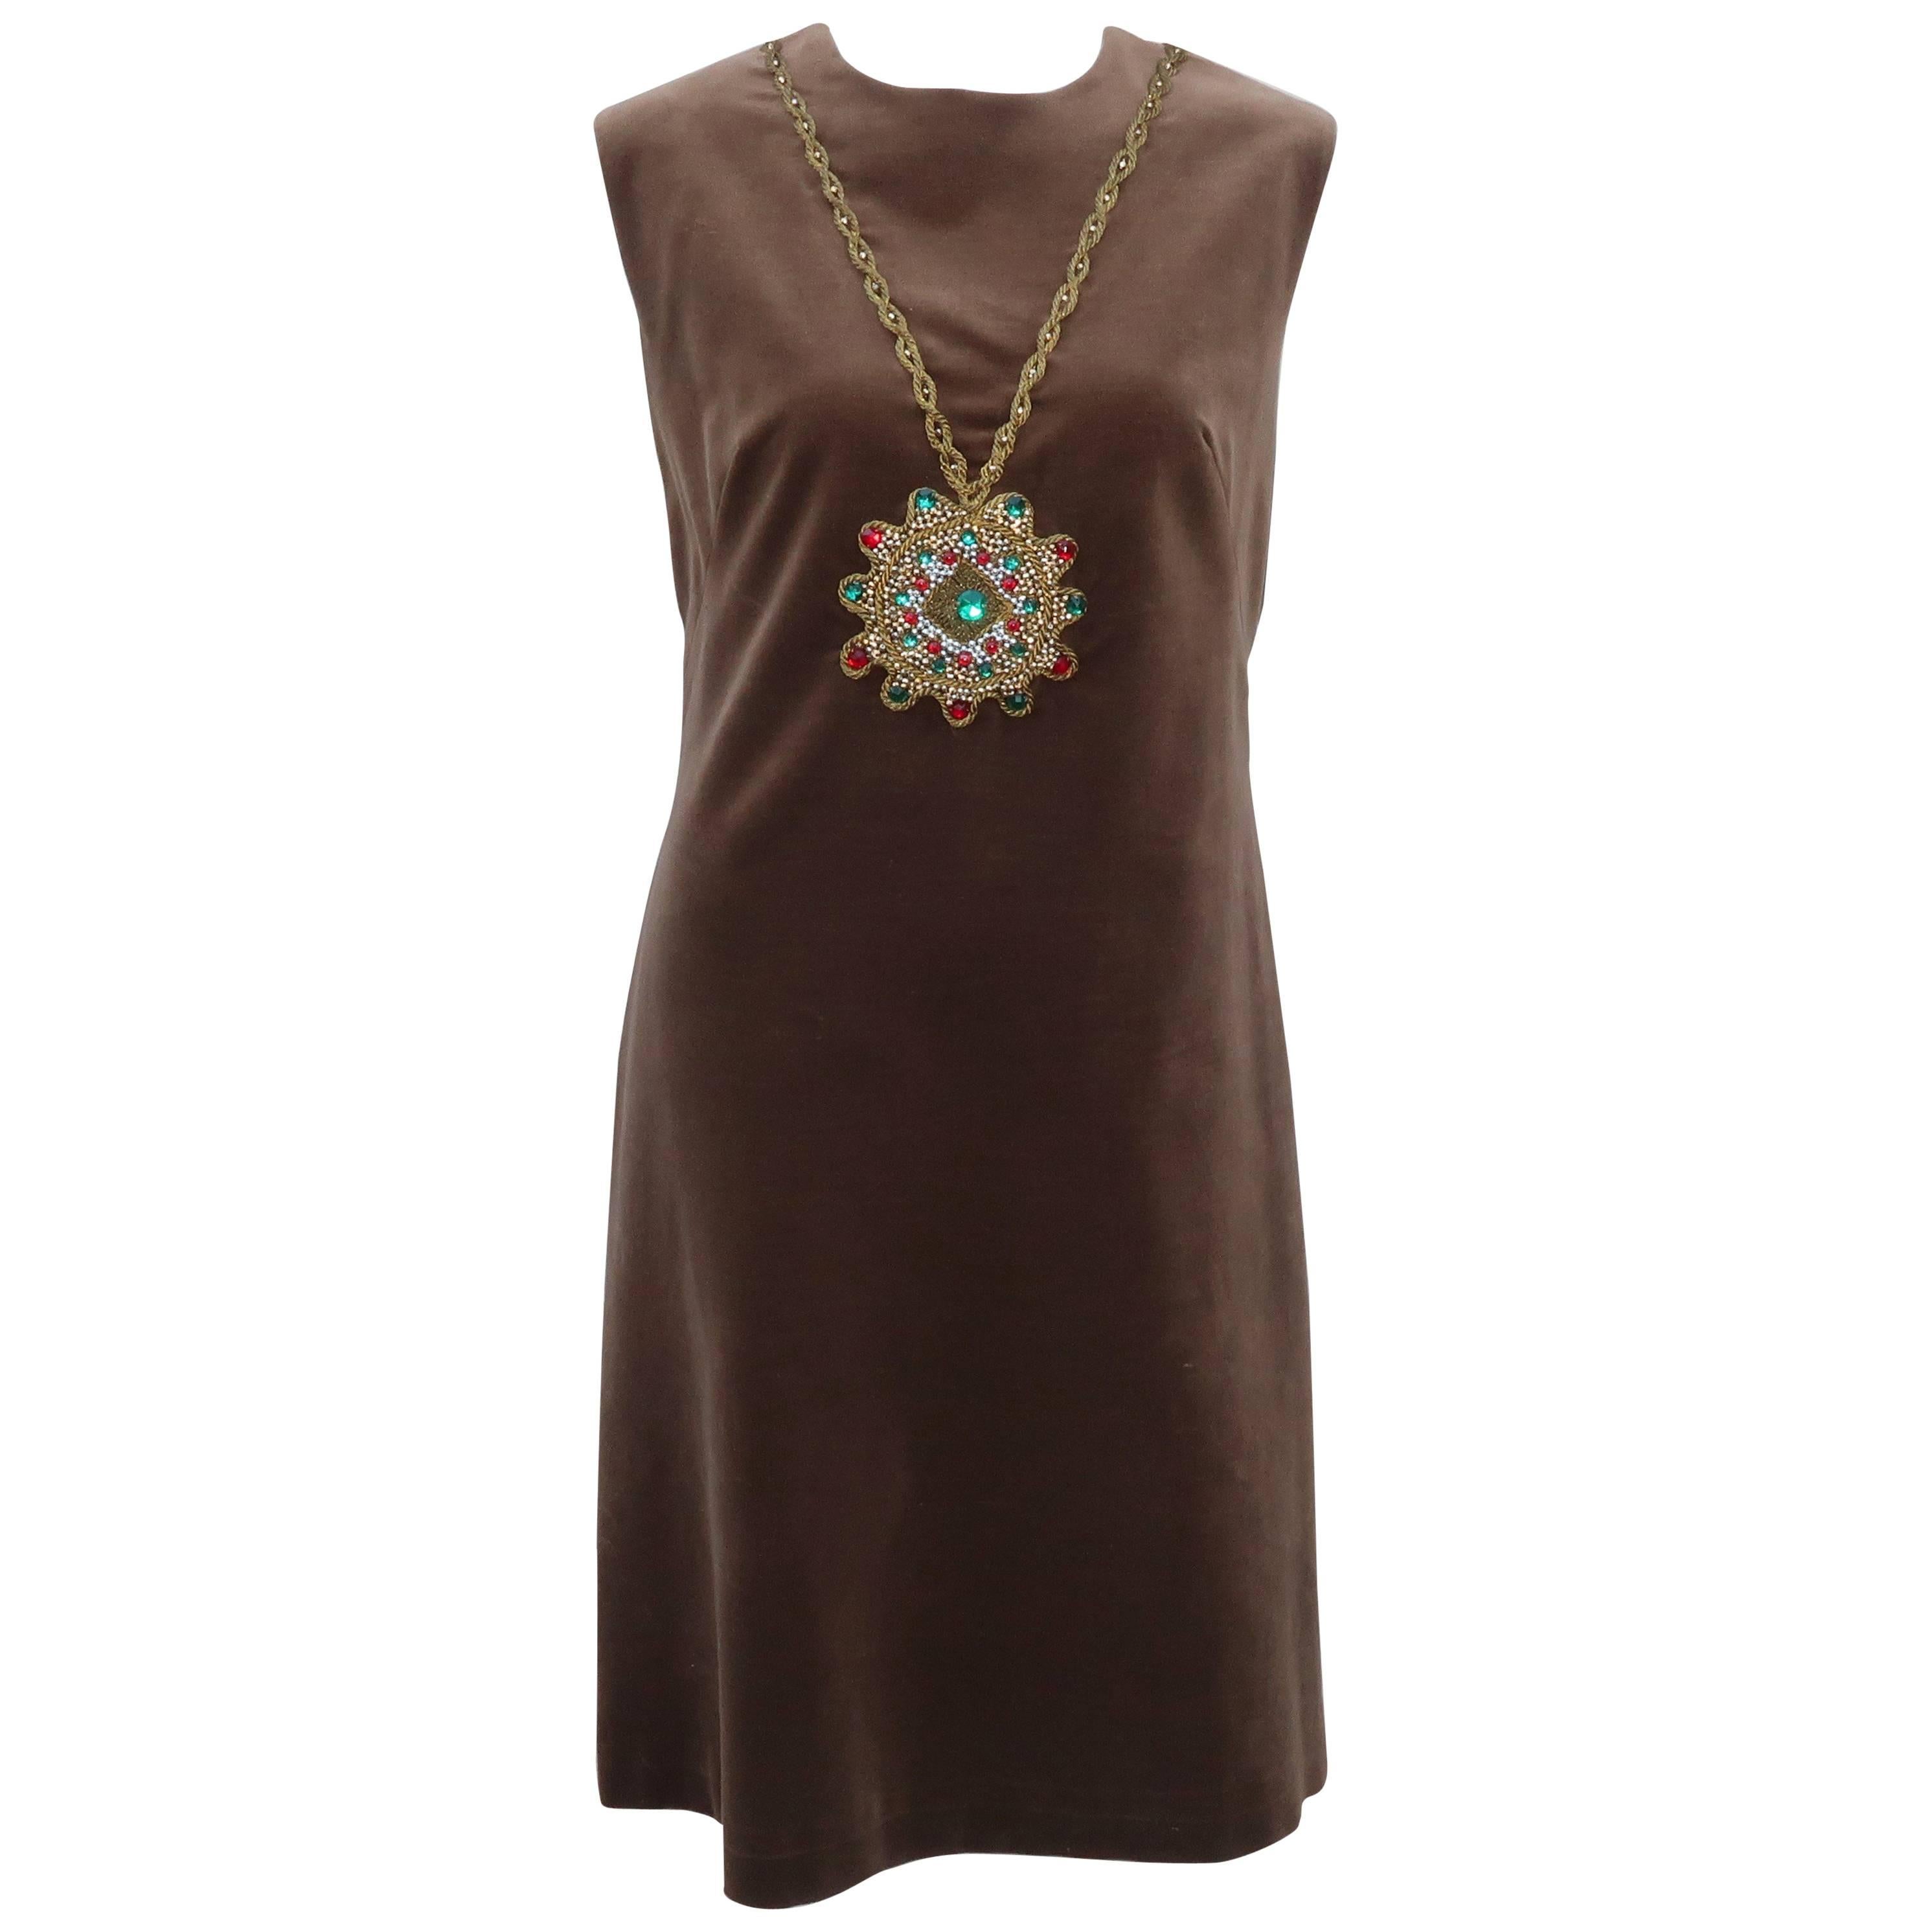 1960's Italian Brown Velveteen Dress With Trompe L'oeil Necklace